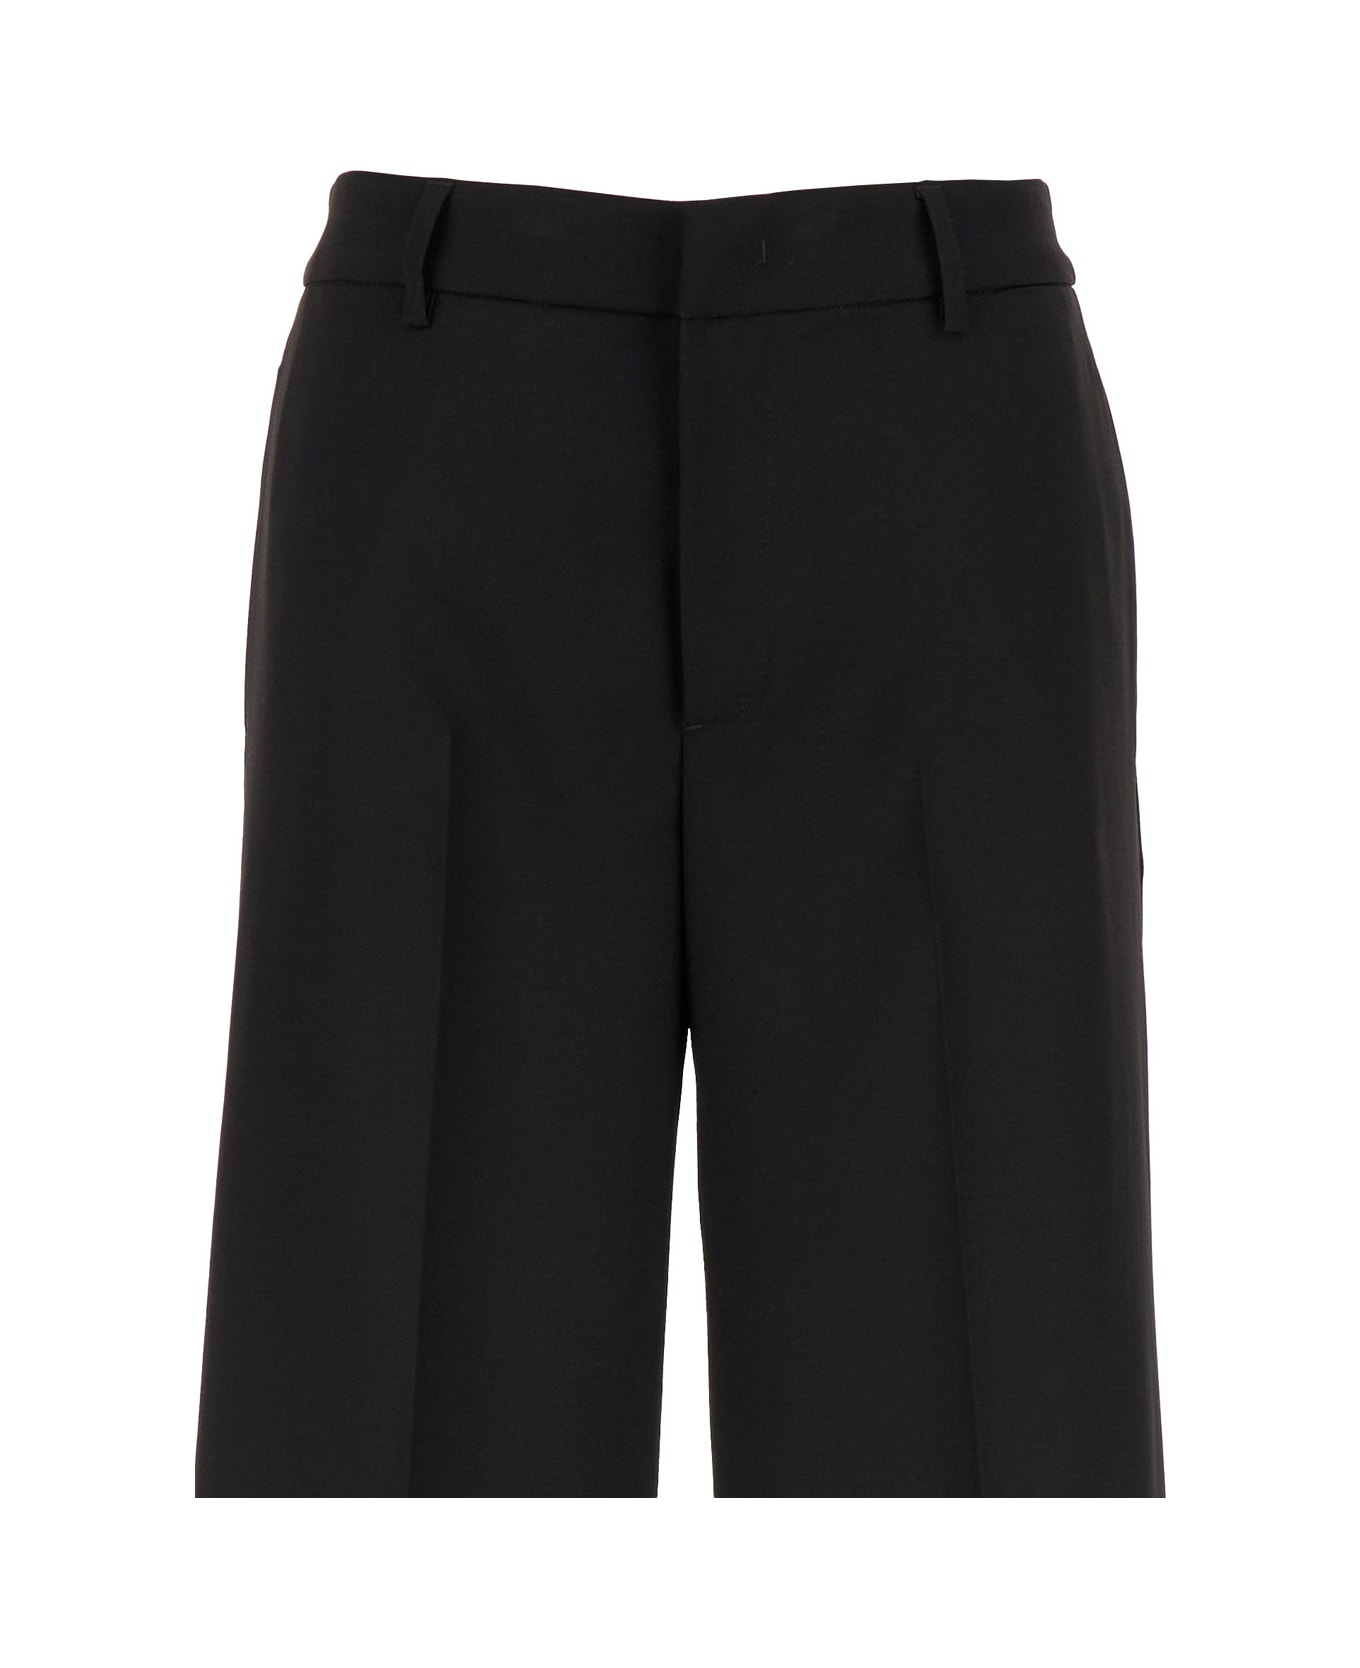 PT01 Tailored 'lorenza' High Waisted Black Trousers In Technical Fabric Woman - nero ボトムス